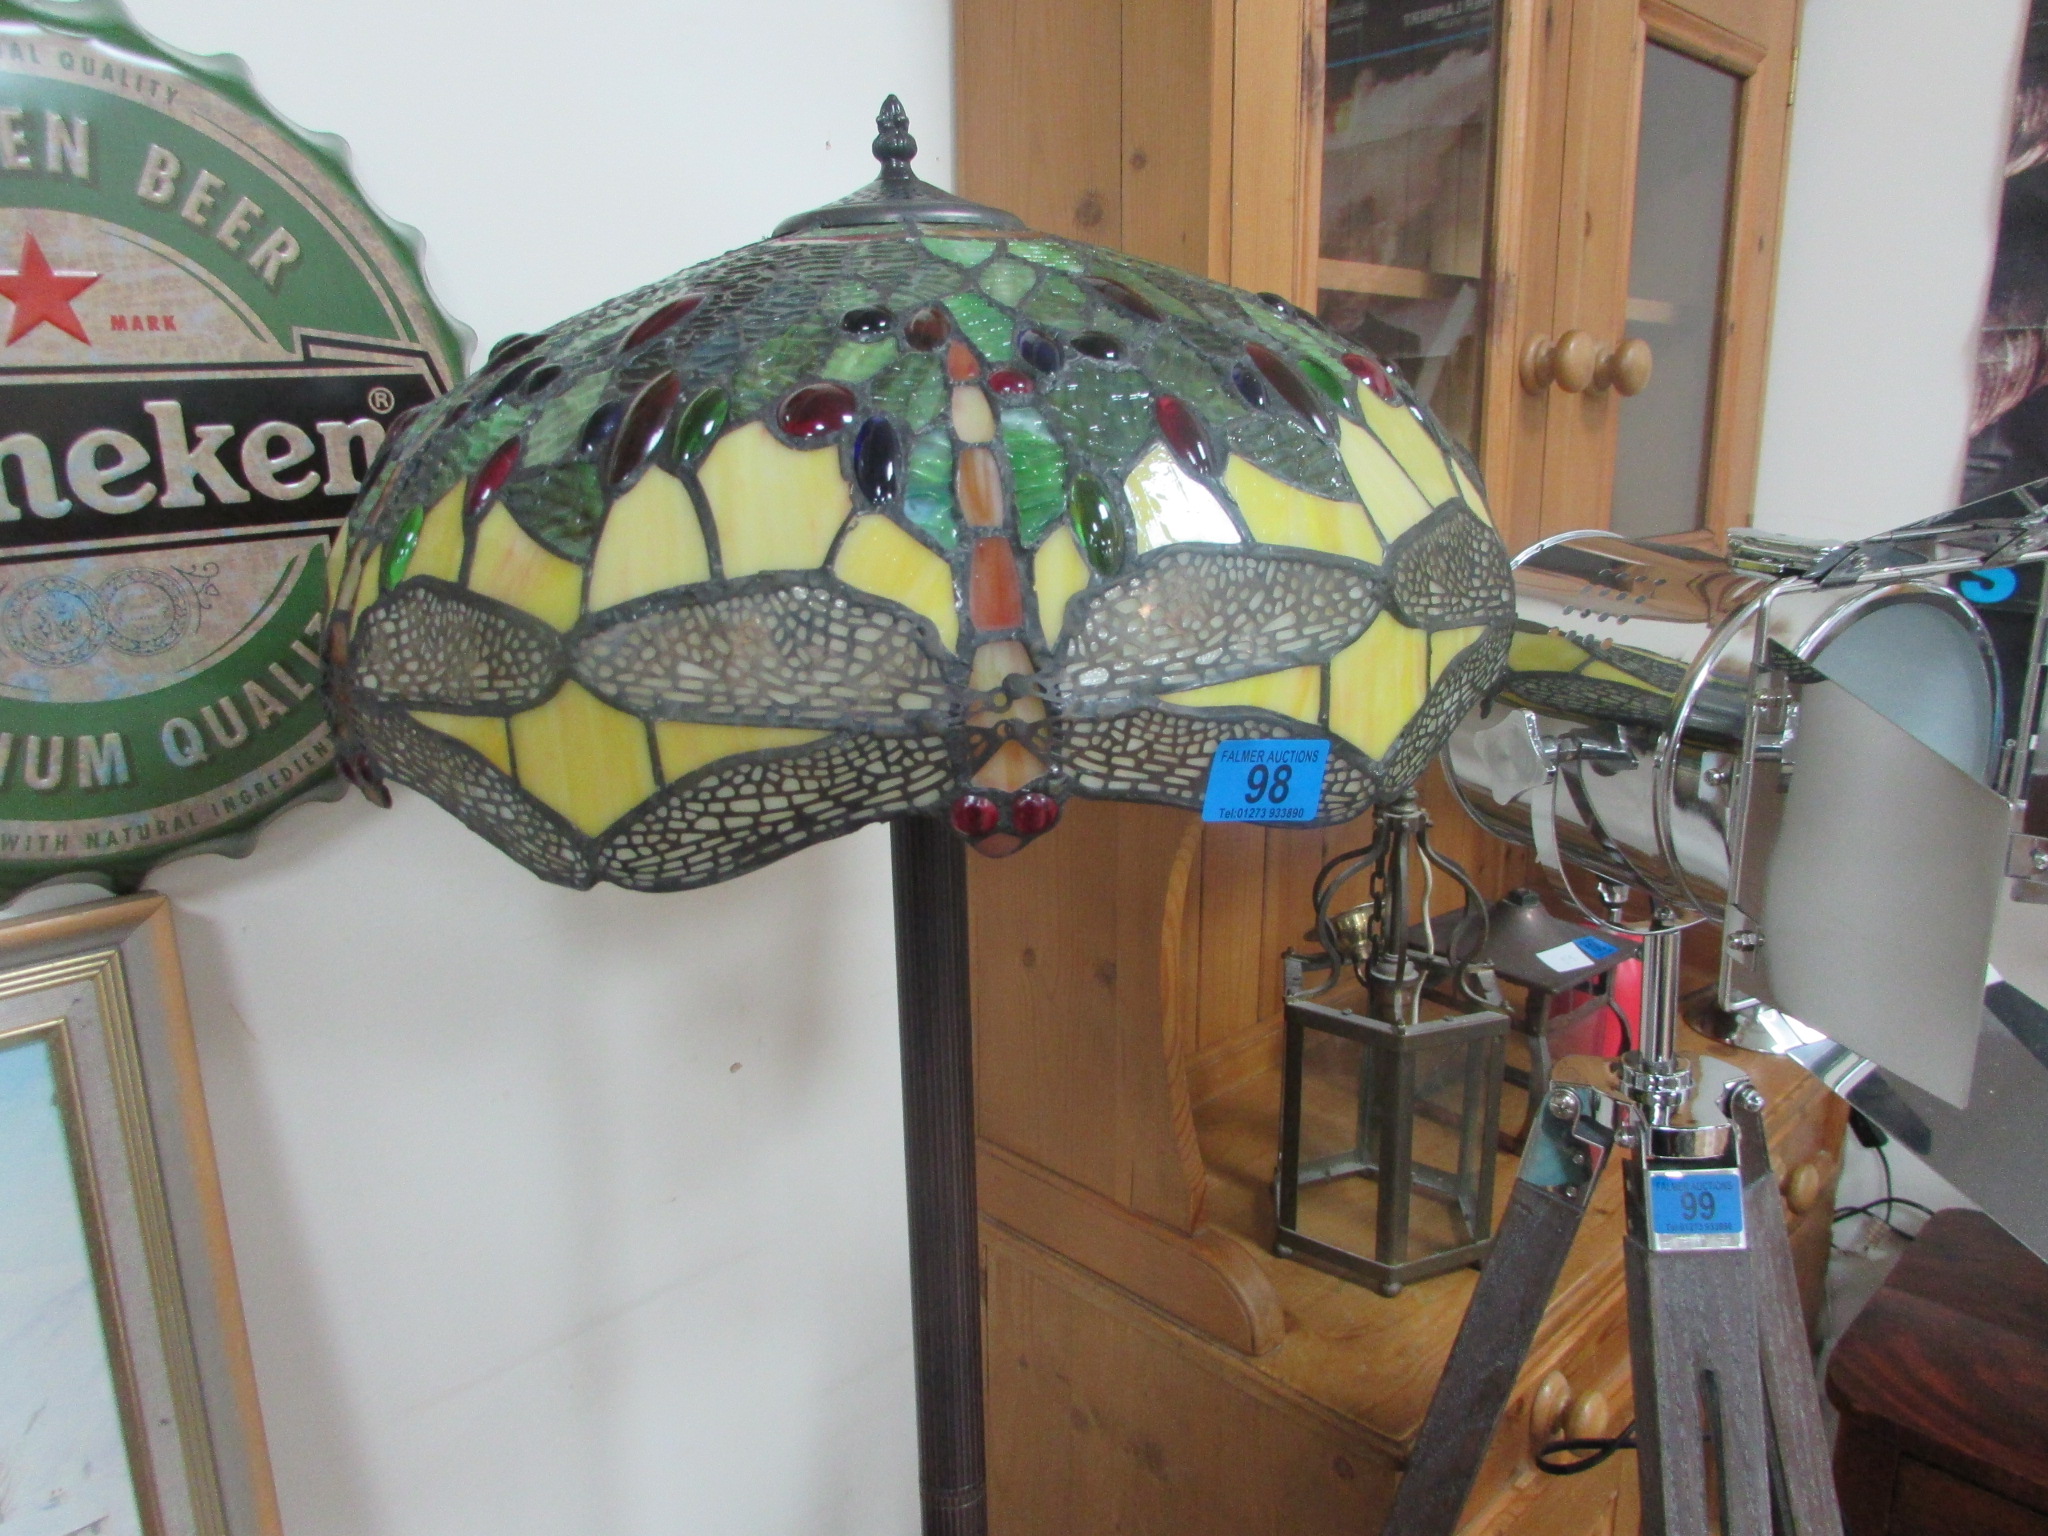 Large floor standing Tiffany style lamp